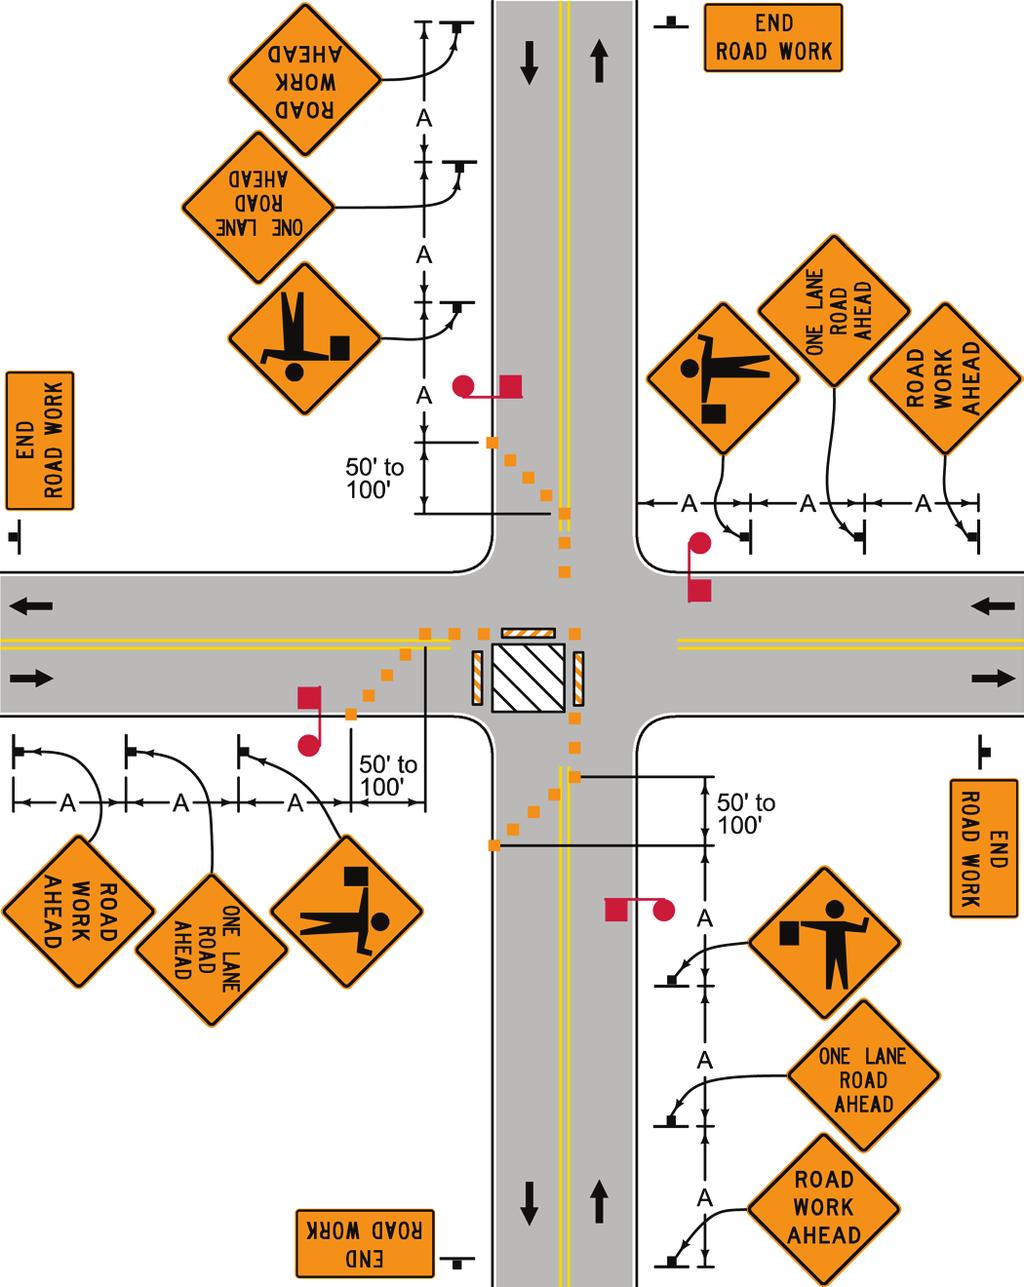 17. CLOSURE WITHIN AN INTERSECTION The situation depicted can be simplified by closing one or more of the intersection approaches.